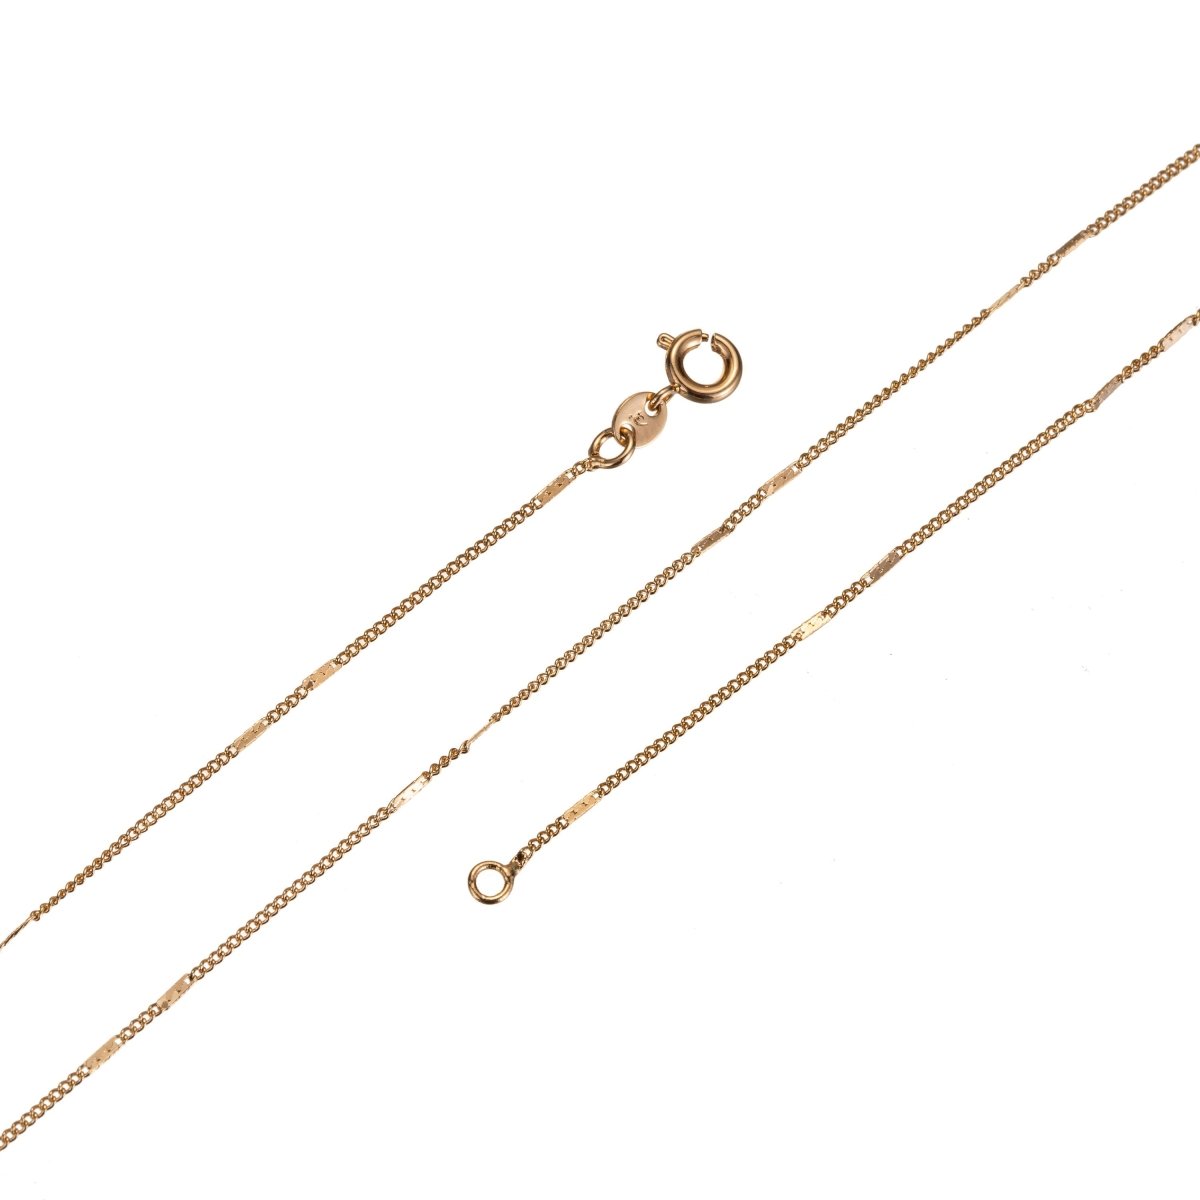 18K Gold Filled 2mm Criss Cross Chain Necklace, Gold Filled Finished Chain Necklace Ready to Wear 15.6 Inch Gold Chain w/ Spring Clasp | CN-668 Clearance Pricing - DLUXCA